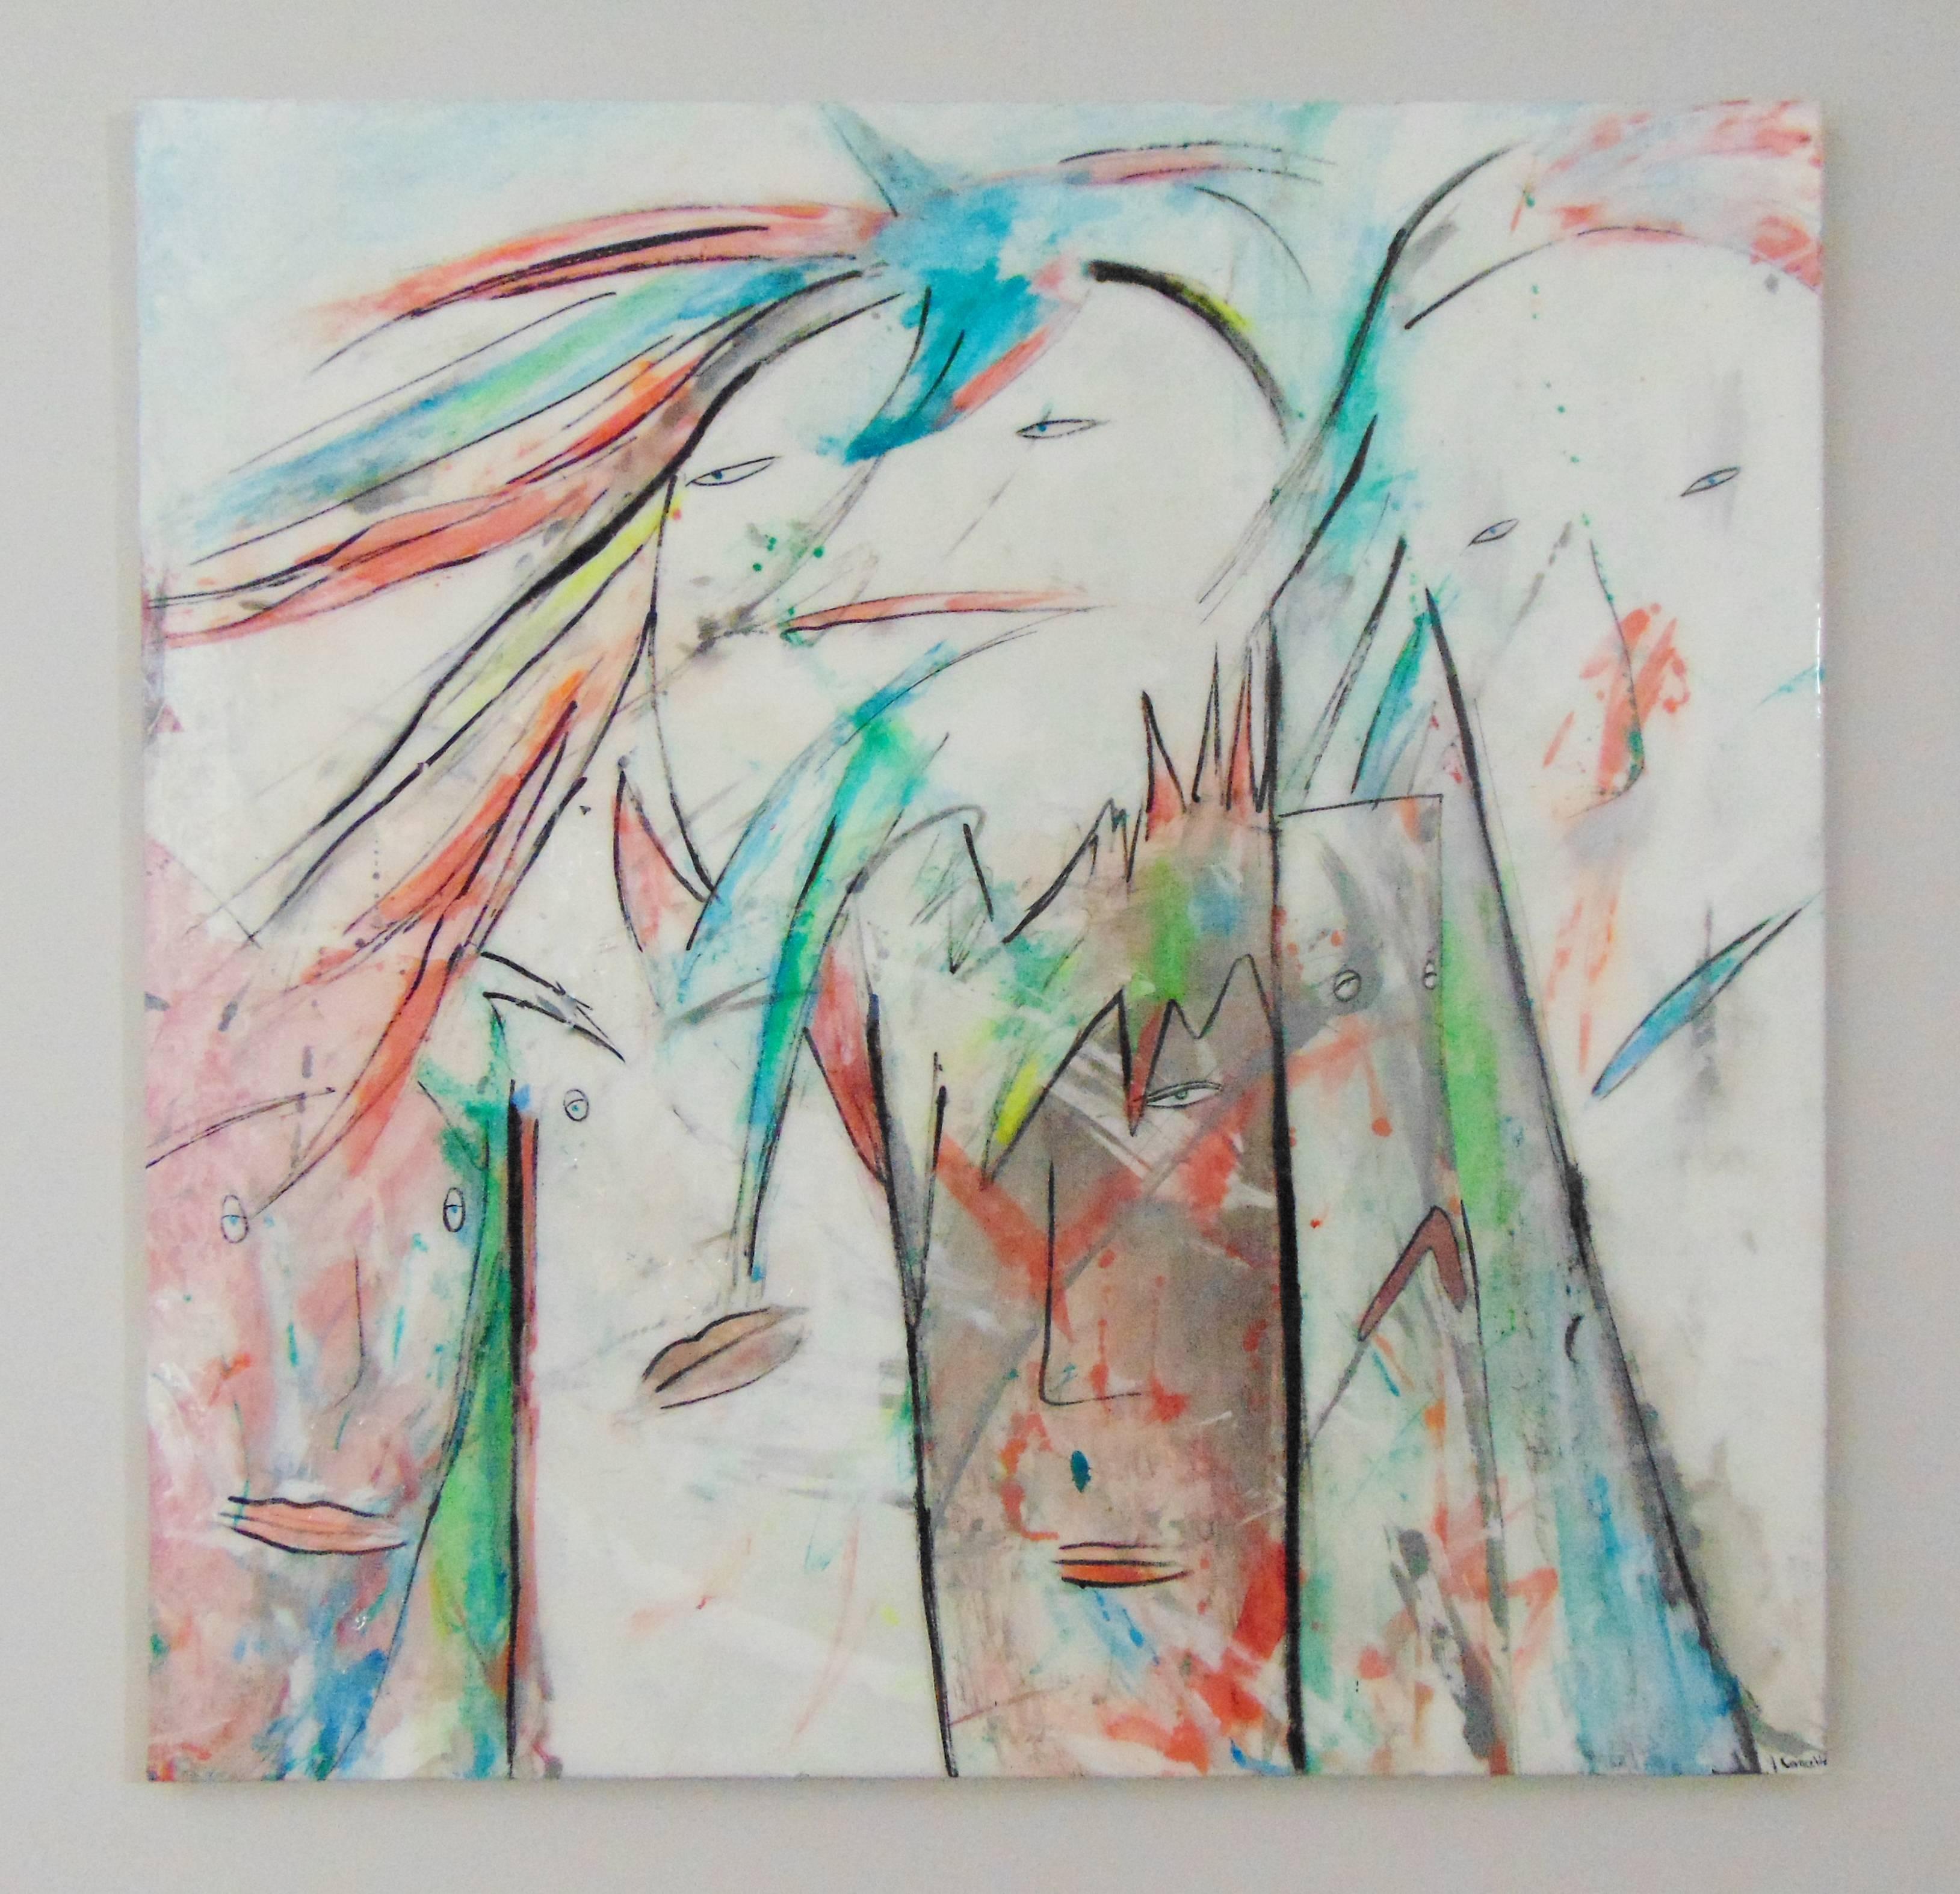 <p>Artist Comments<br />This painting is about summer fun. Movement is used to reflect freedom. The painting is made with inks and dyes on rice paper and canvas, then coated with resin to enhance the colors and protect the surface. This piece is on